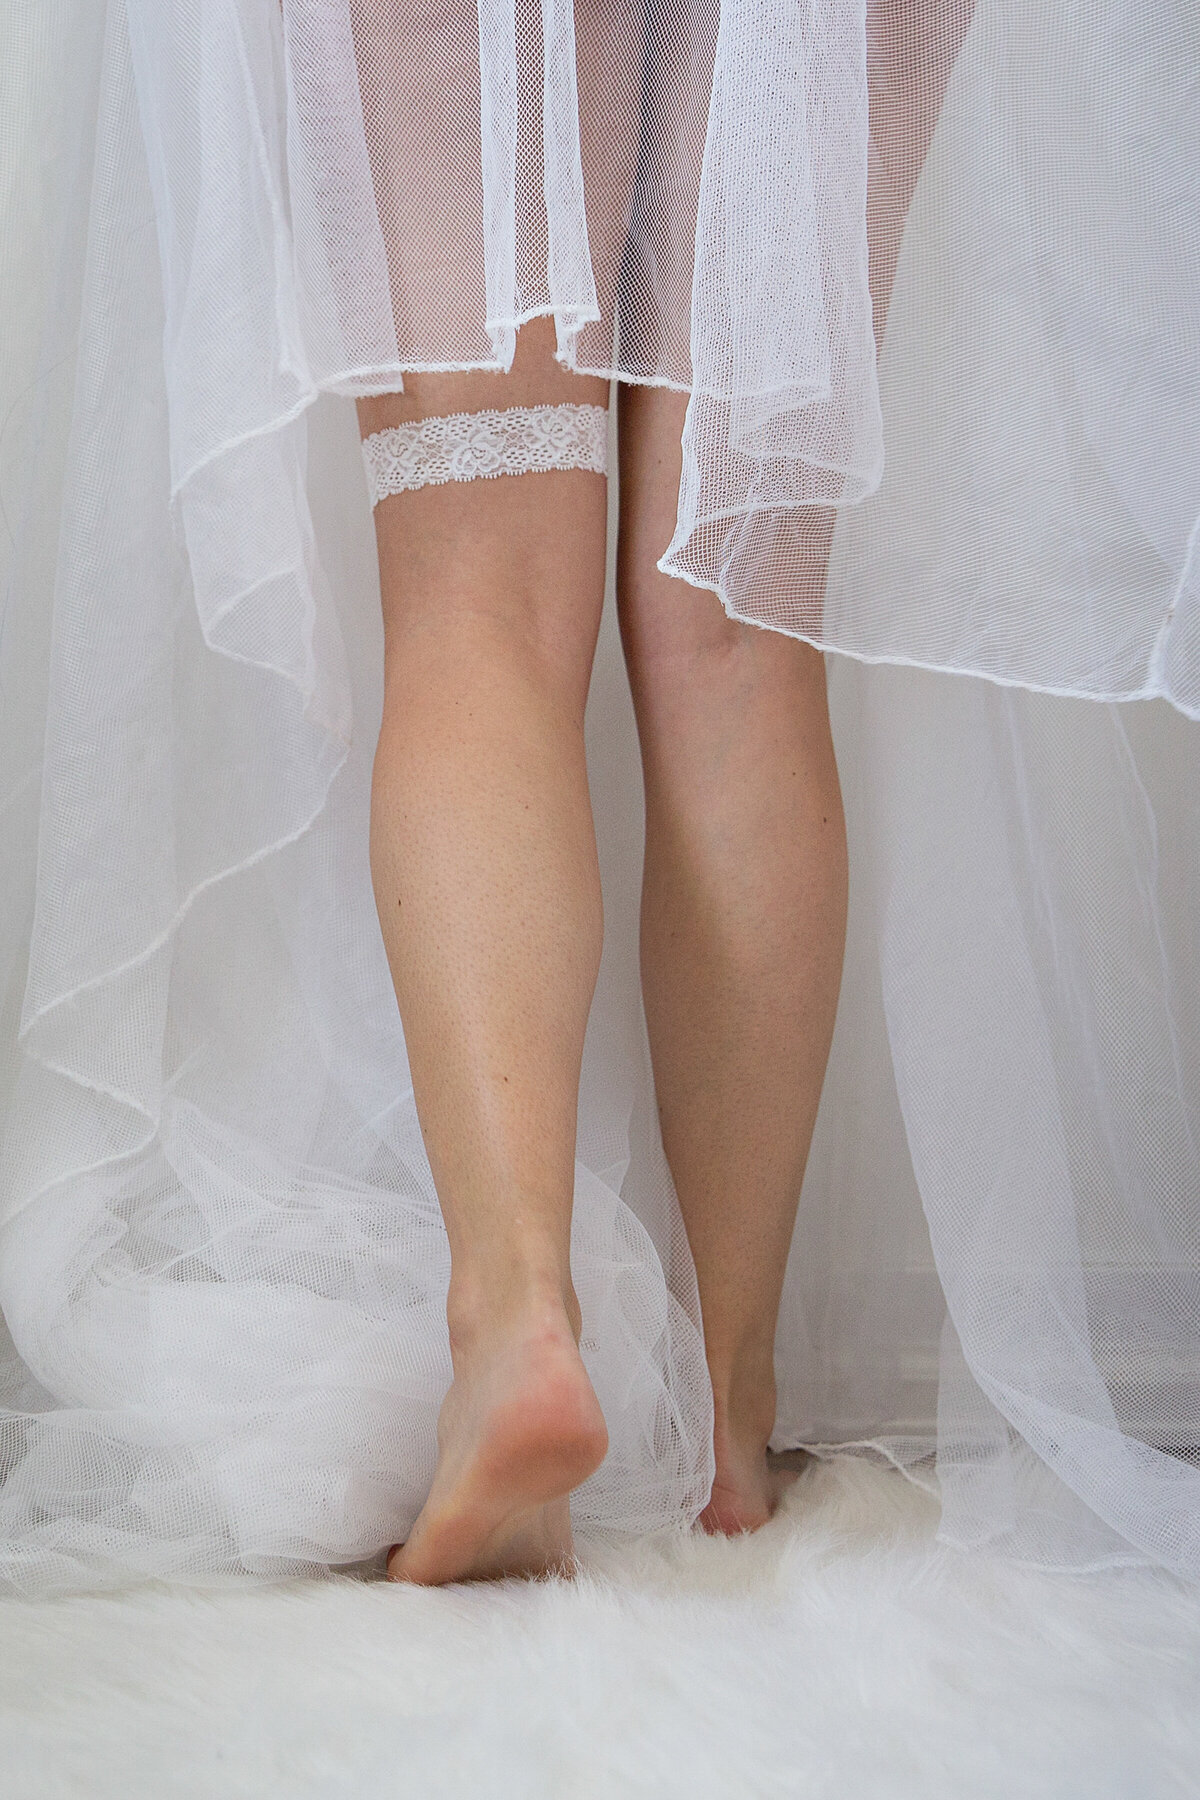 Bright and airy sexy shot of bare legs with garter and veil